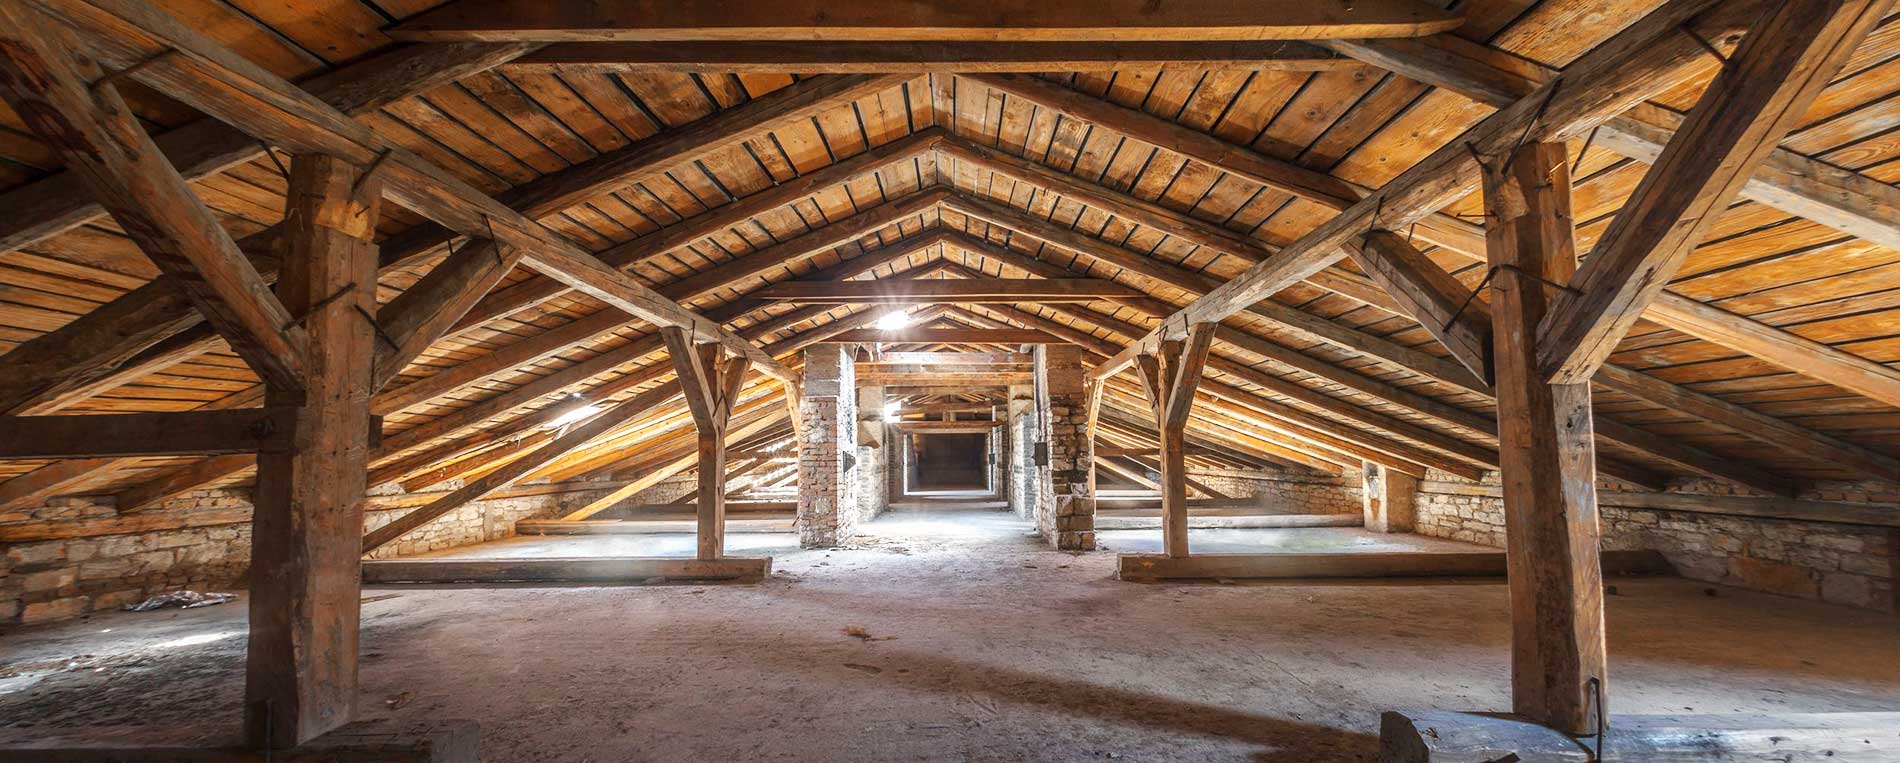 3 Reasons to Call Attic Insulation Removal